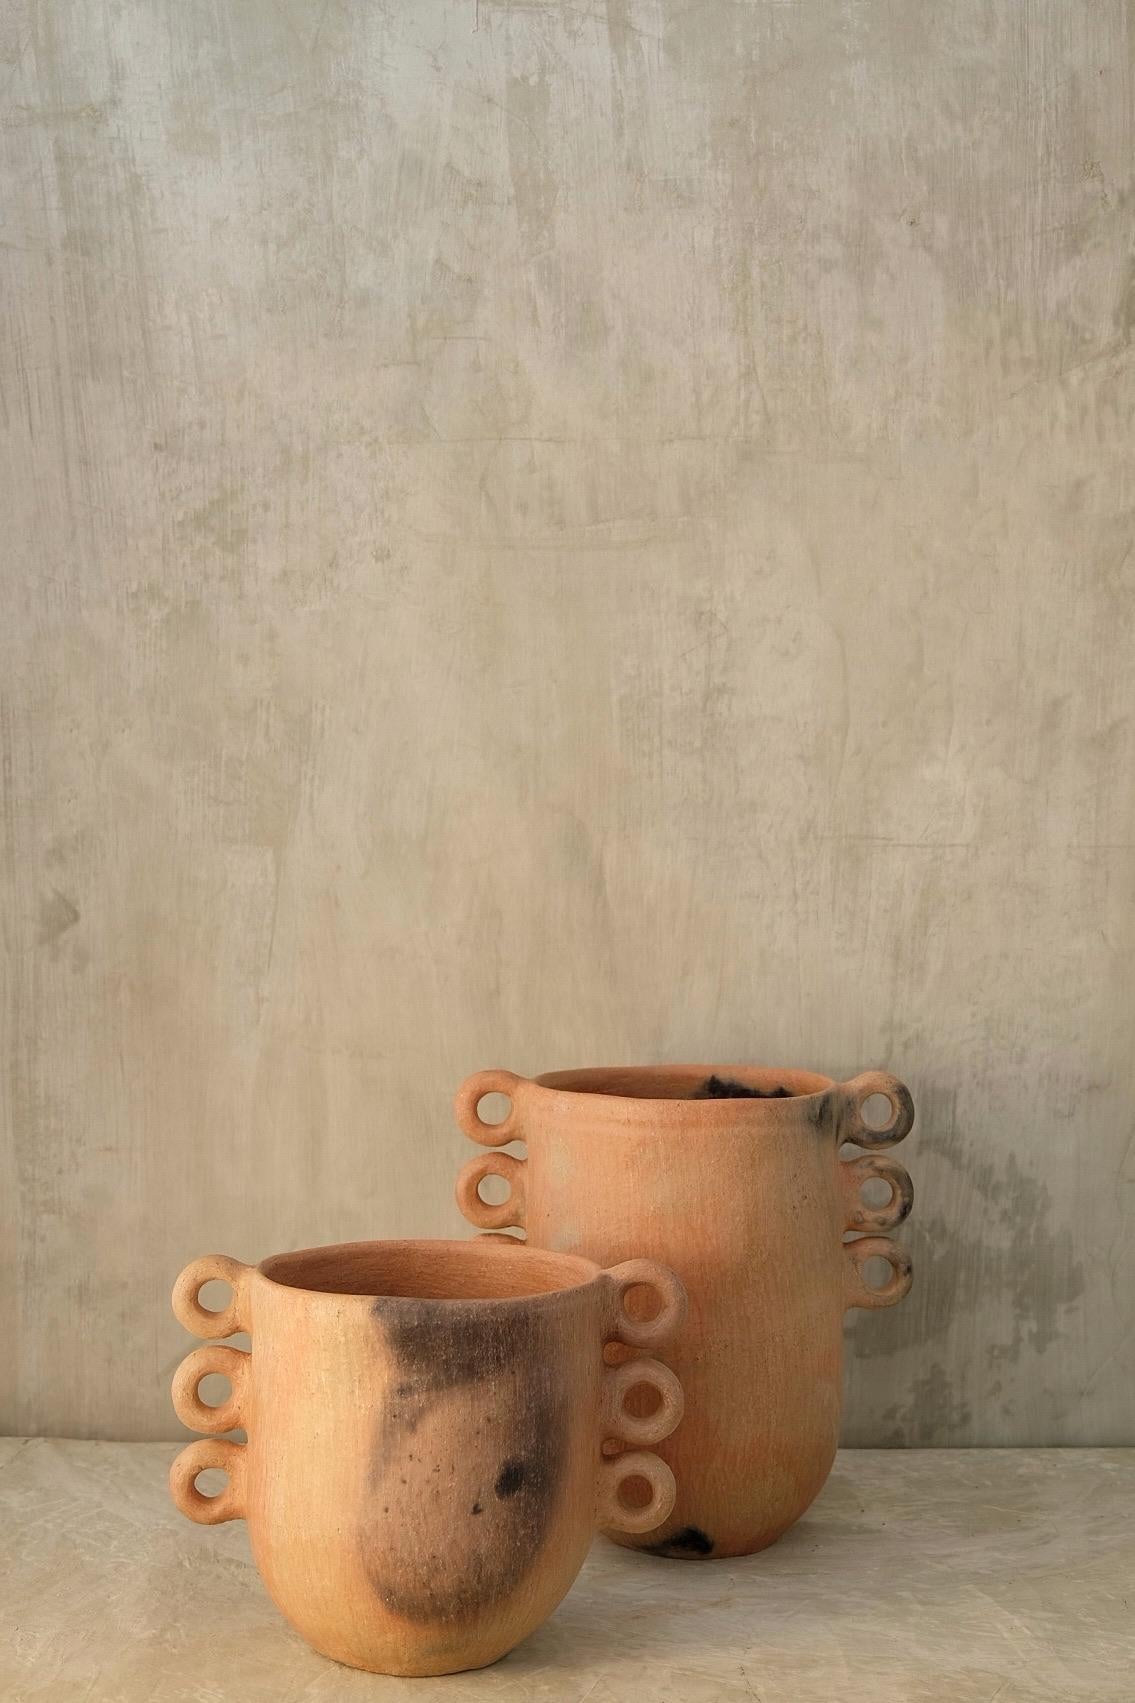 Tierra Caliente vase by Onora
Dimensions: 
D 20 x H 30 cm
D 20 x H 20 cm 
Materials: Clay

Hand sculpted clay, covered with a mineral based slip and burnished using a quartz stone. 

We are a Mexican brand dedicated to the creation of high